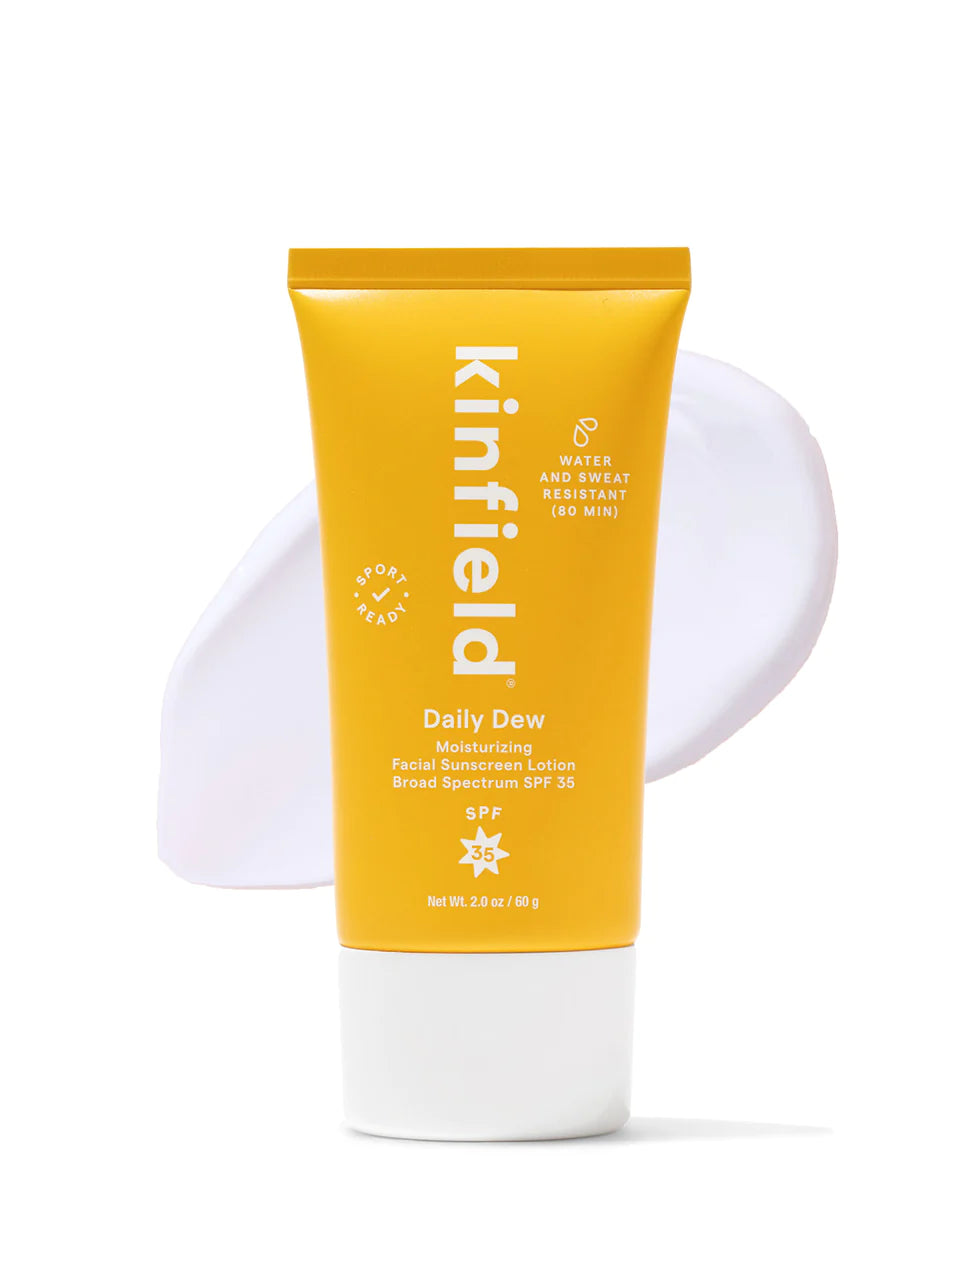 Daily Dew SPF 35 Moisturizing Face Sunscreen by Kinfield